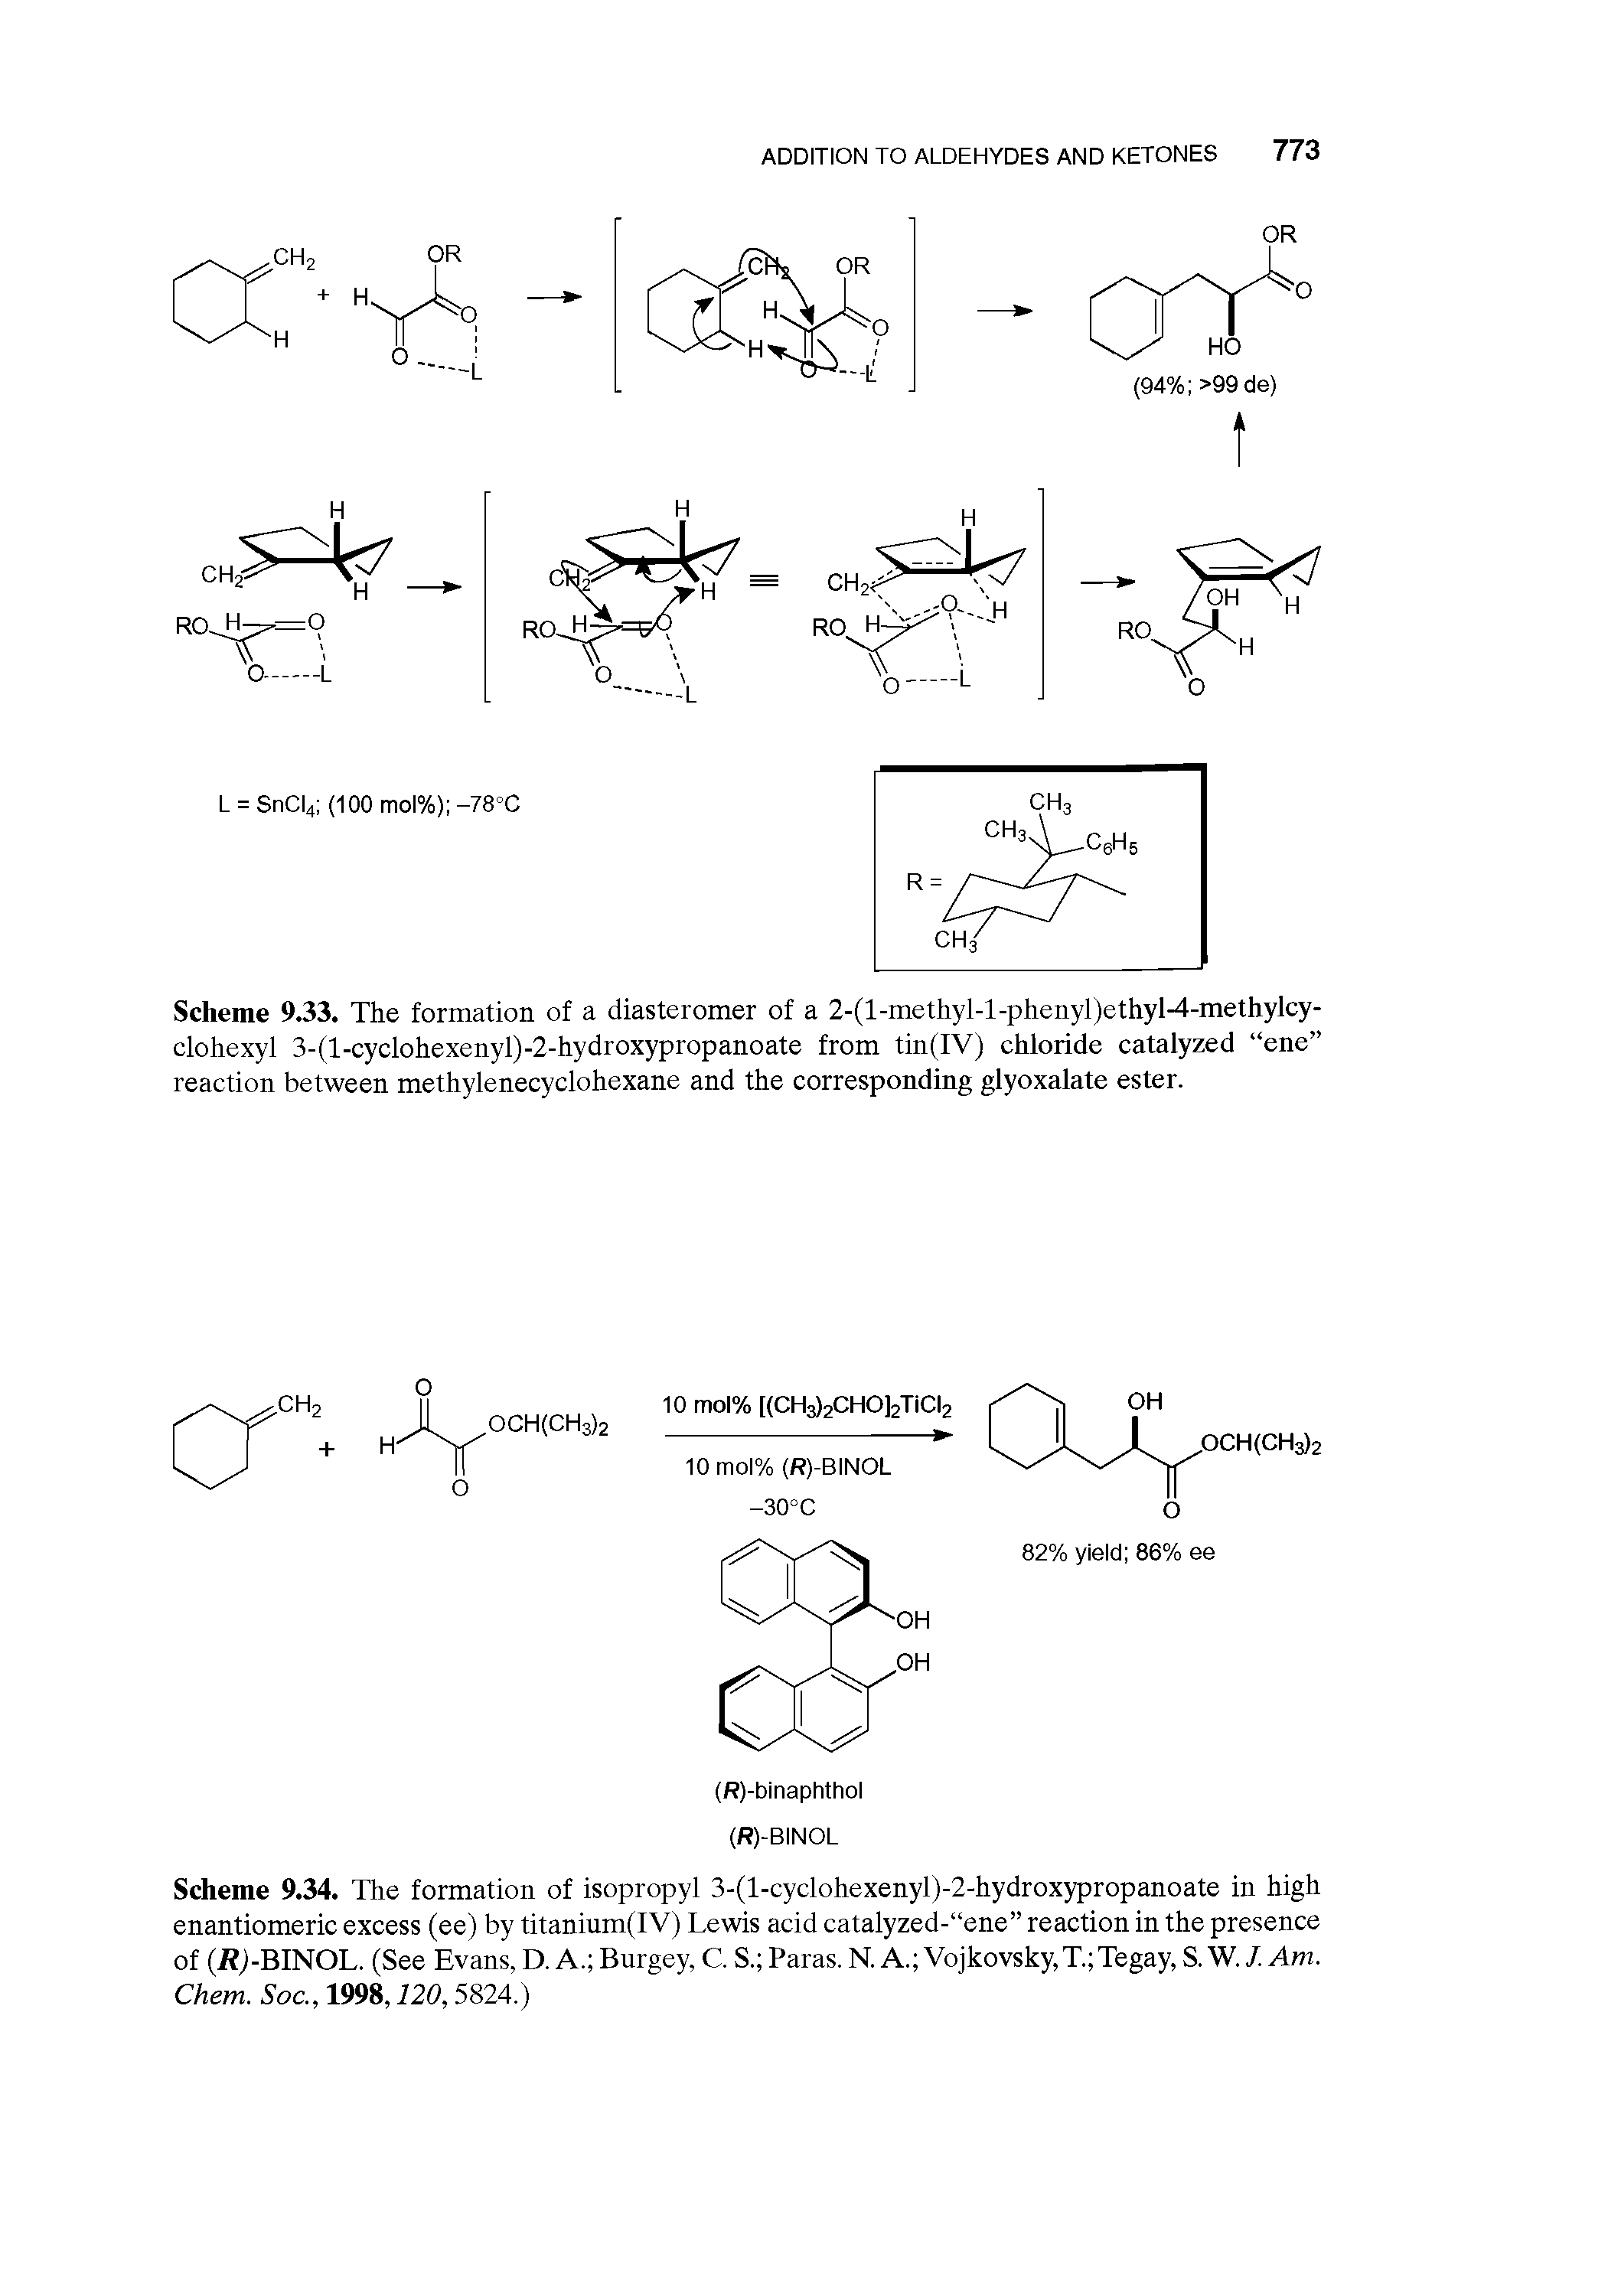 Scheme 9.33. The formation of a diasteromer of a 2-(l-methyl-l-phenyl)ethyl-4-methylcy-clohexyl 3-(l-cyclohexenyl)-2-hydroxypropanoate from tin(IV) chloride catalyzed ene reaction between methylenecyclohexane and the corresponding glyoxalate ester.